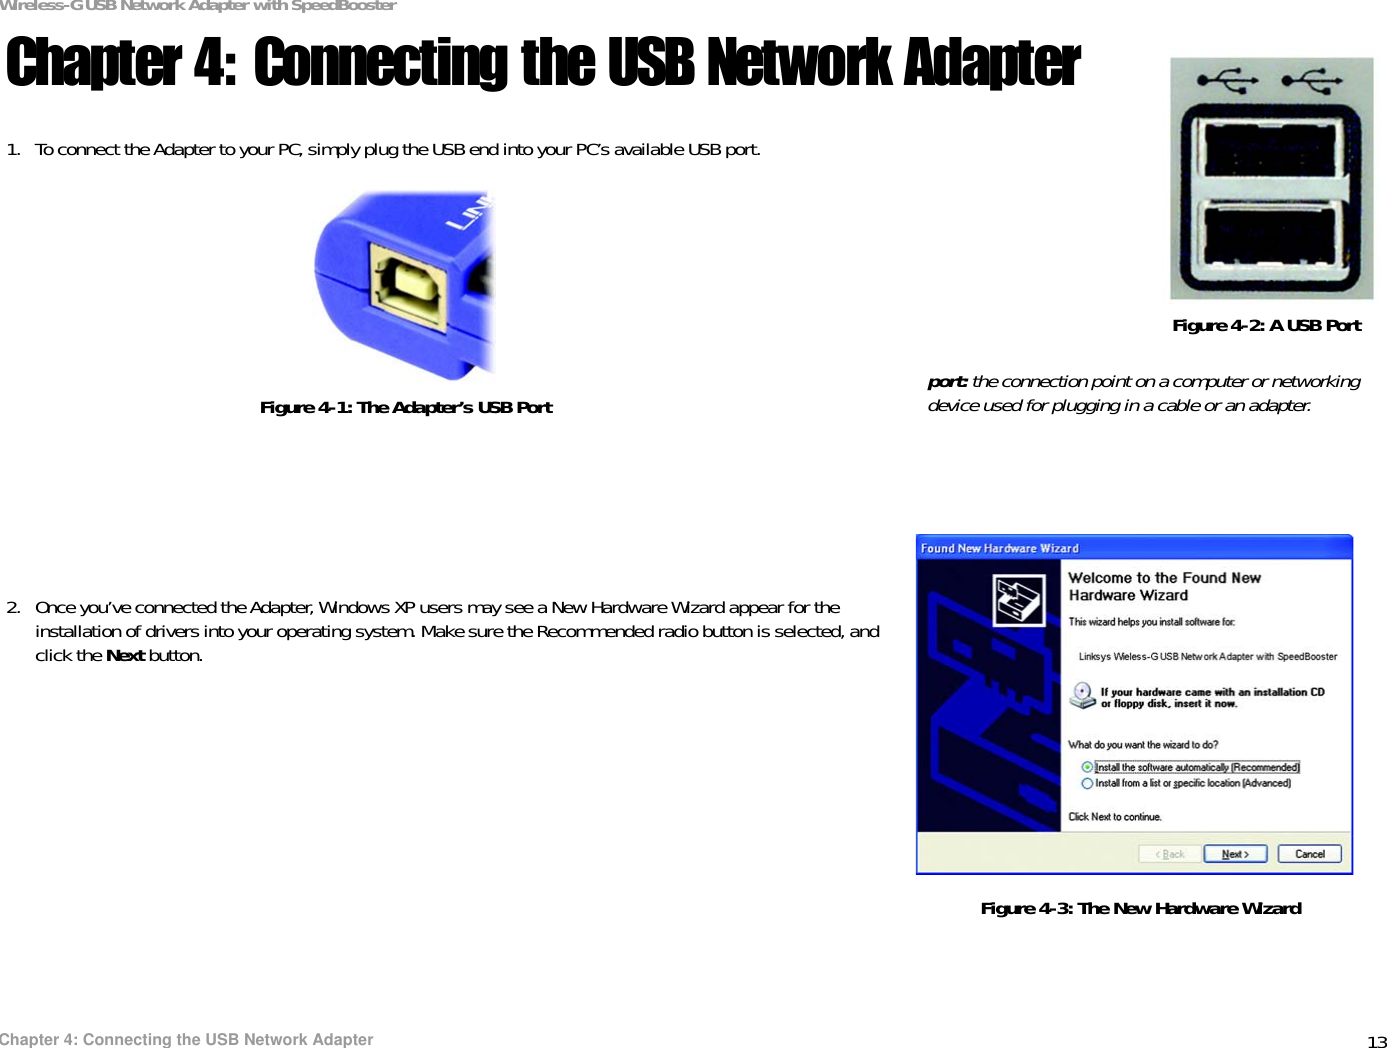 13Chapter 4: Connecting the USB Network AdapterWireless-G USB Network Adapter with SpeedBoosterChapter 4: Connecting the USB Network Adapter1. To connect the Adapter to your PC, simply plug the USB end into your PC’s available USB port.2. Once you’ve connected the Adapter, Windows XP users may see a New Hardware Wizard appear for the installation of drivers into your operating system. Make sure the Recommended radio button is selected, and click the Next button.Figure 4-1: The Adapter’s USB PortFigure 4-2: A USB Portport: the connection point on a computer or networking device used for plugging in a cable or an adapter. Figure 4-3: The New Hardware Wizard